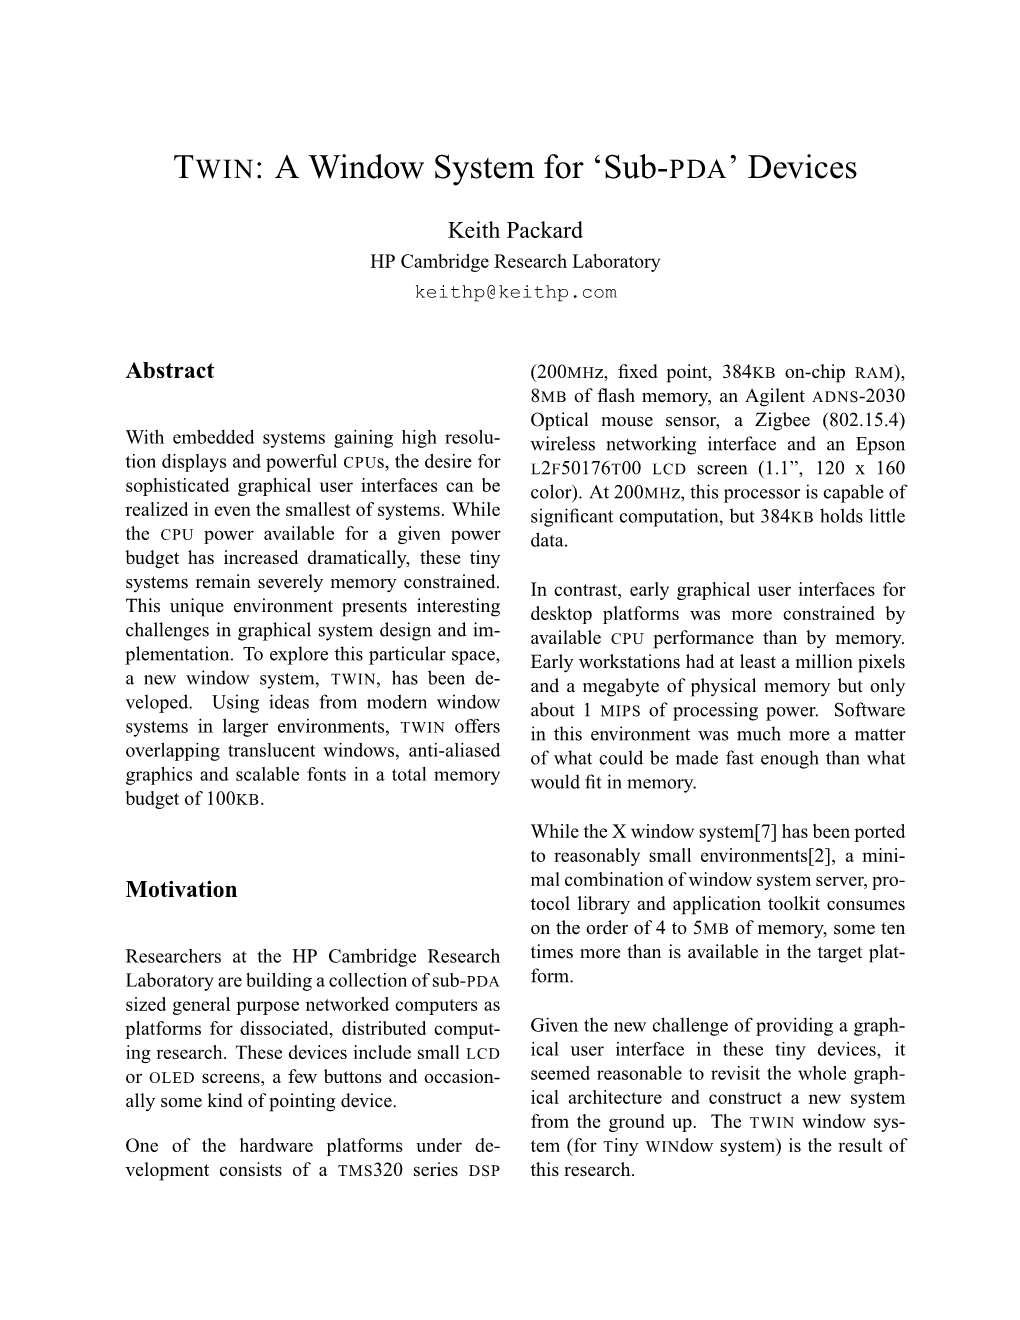 TWIN: a Window System for ‘Sub-PDA’ Devices